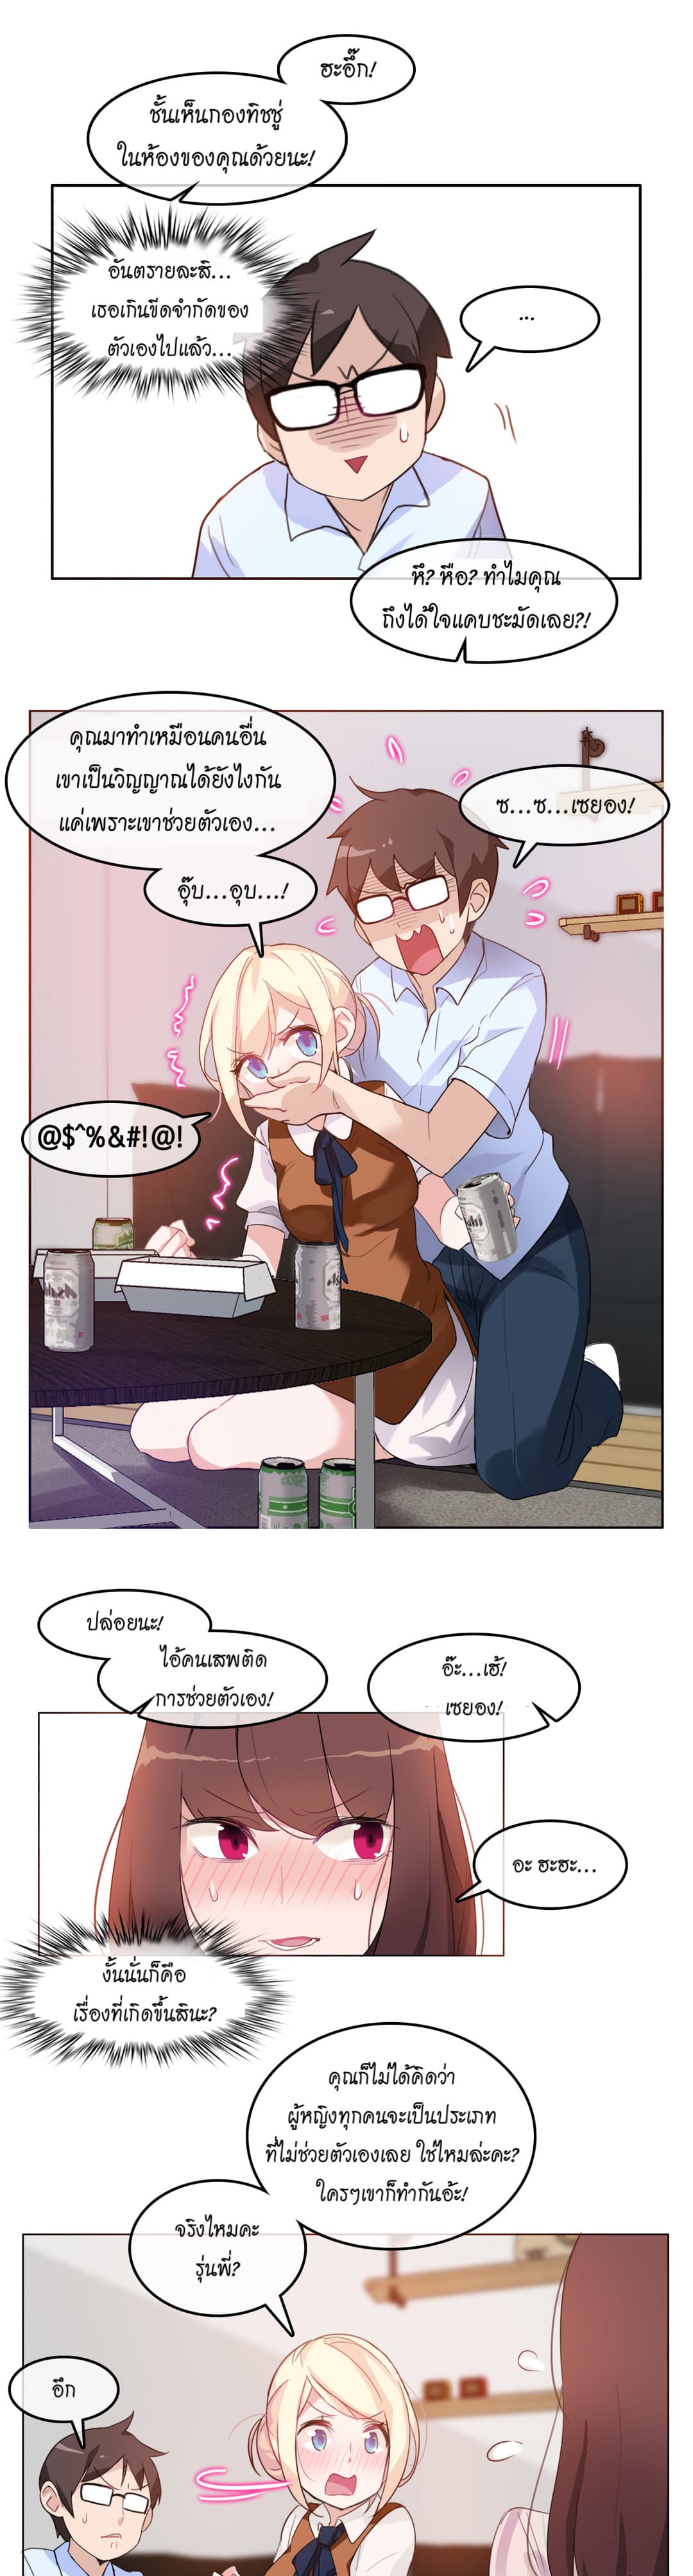 A Pervert’s Daily Life 9 (7)